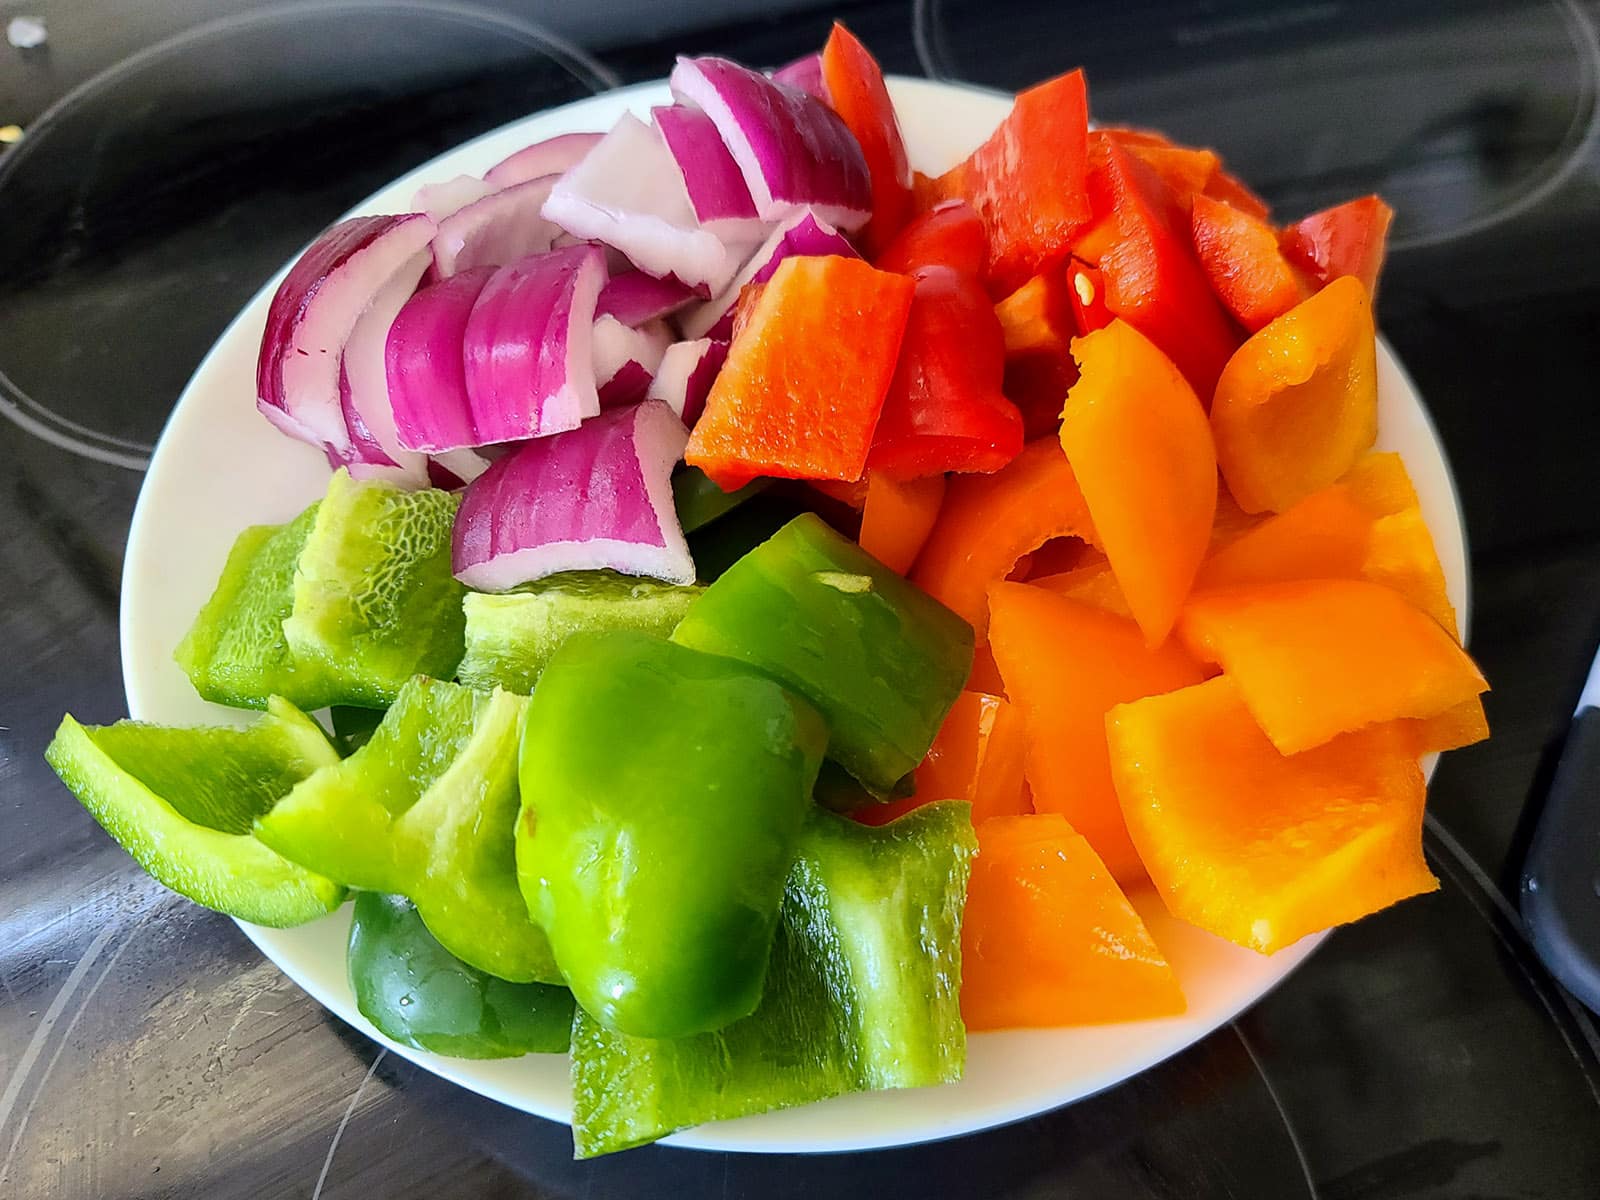 A bowl of cut up bell peppers and red onion.